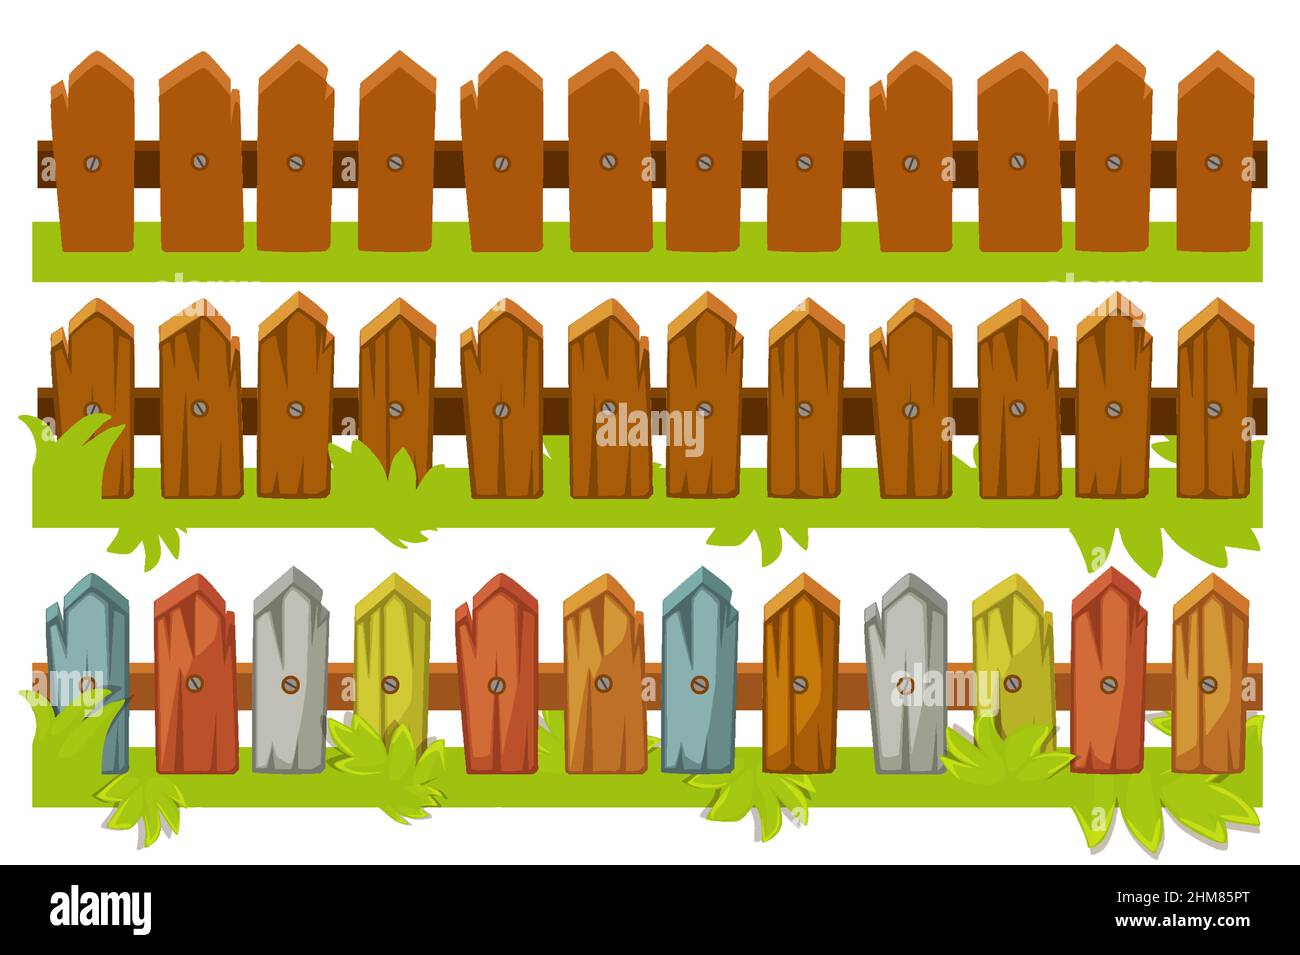 Vector illustration of a set of wooden fences. Stock Vector